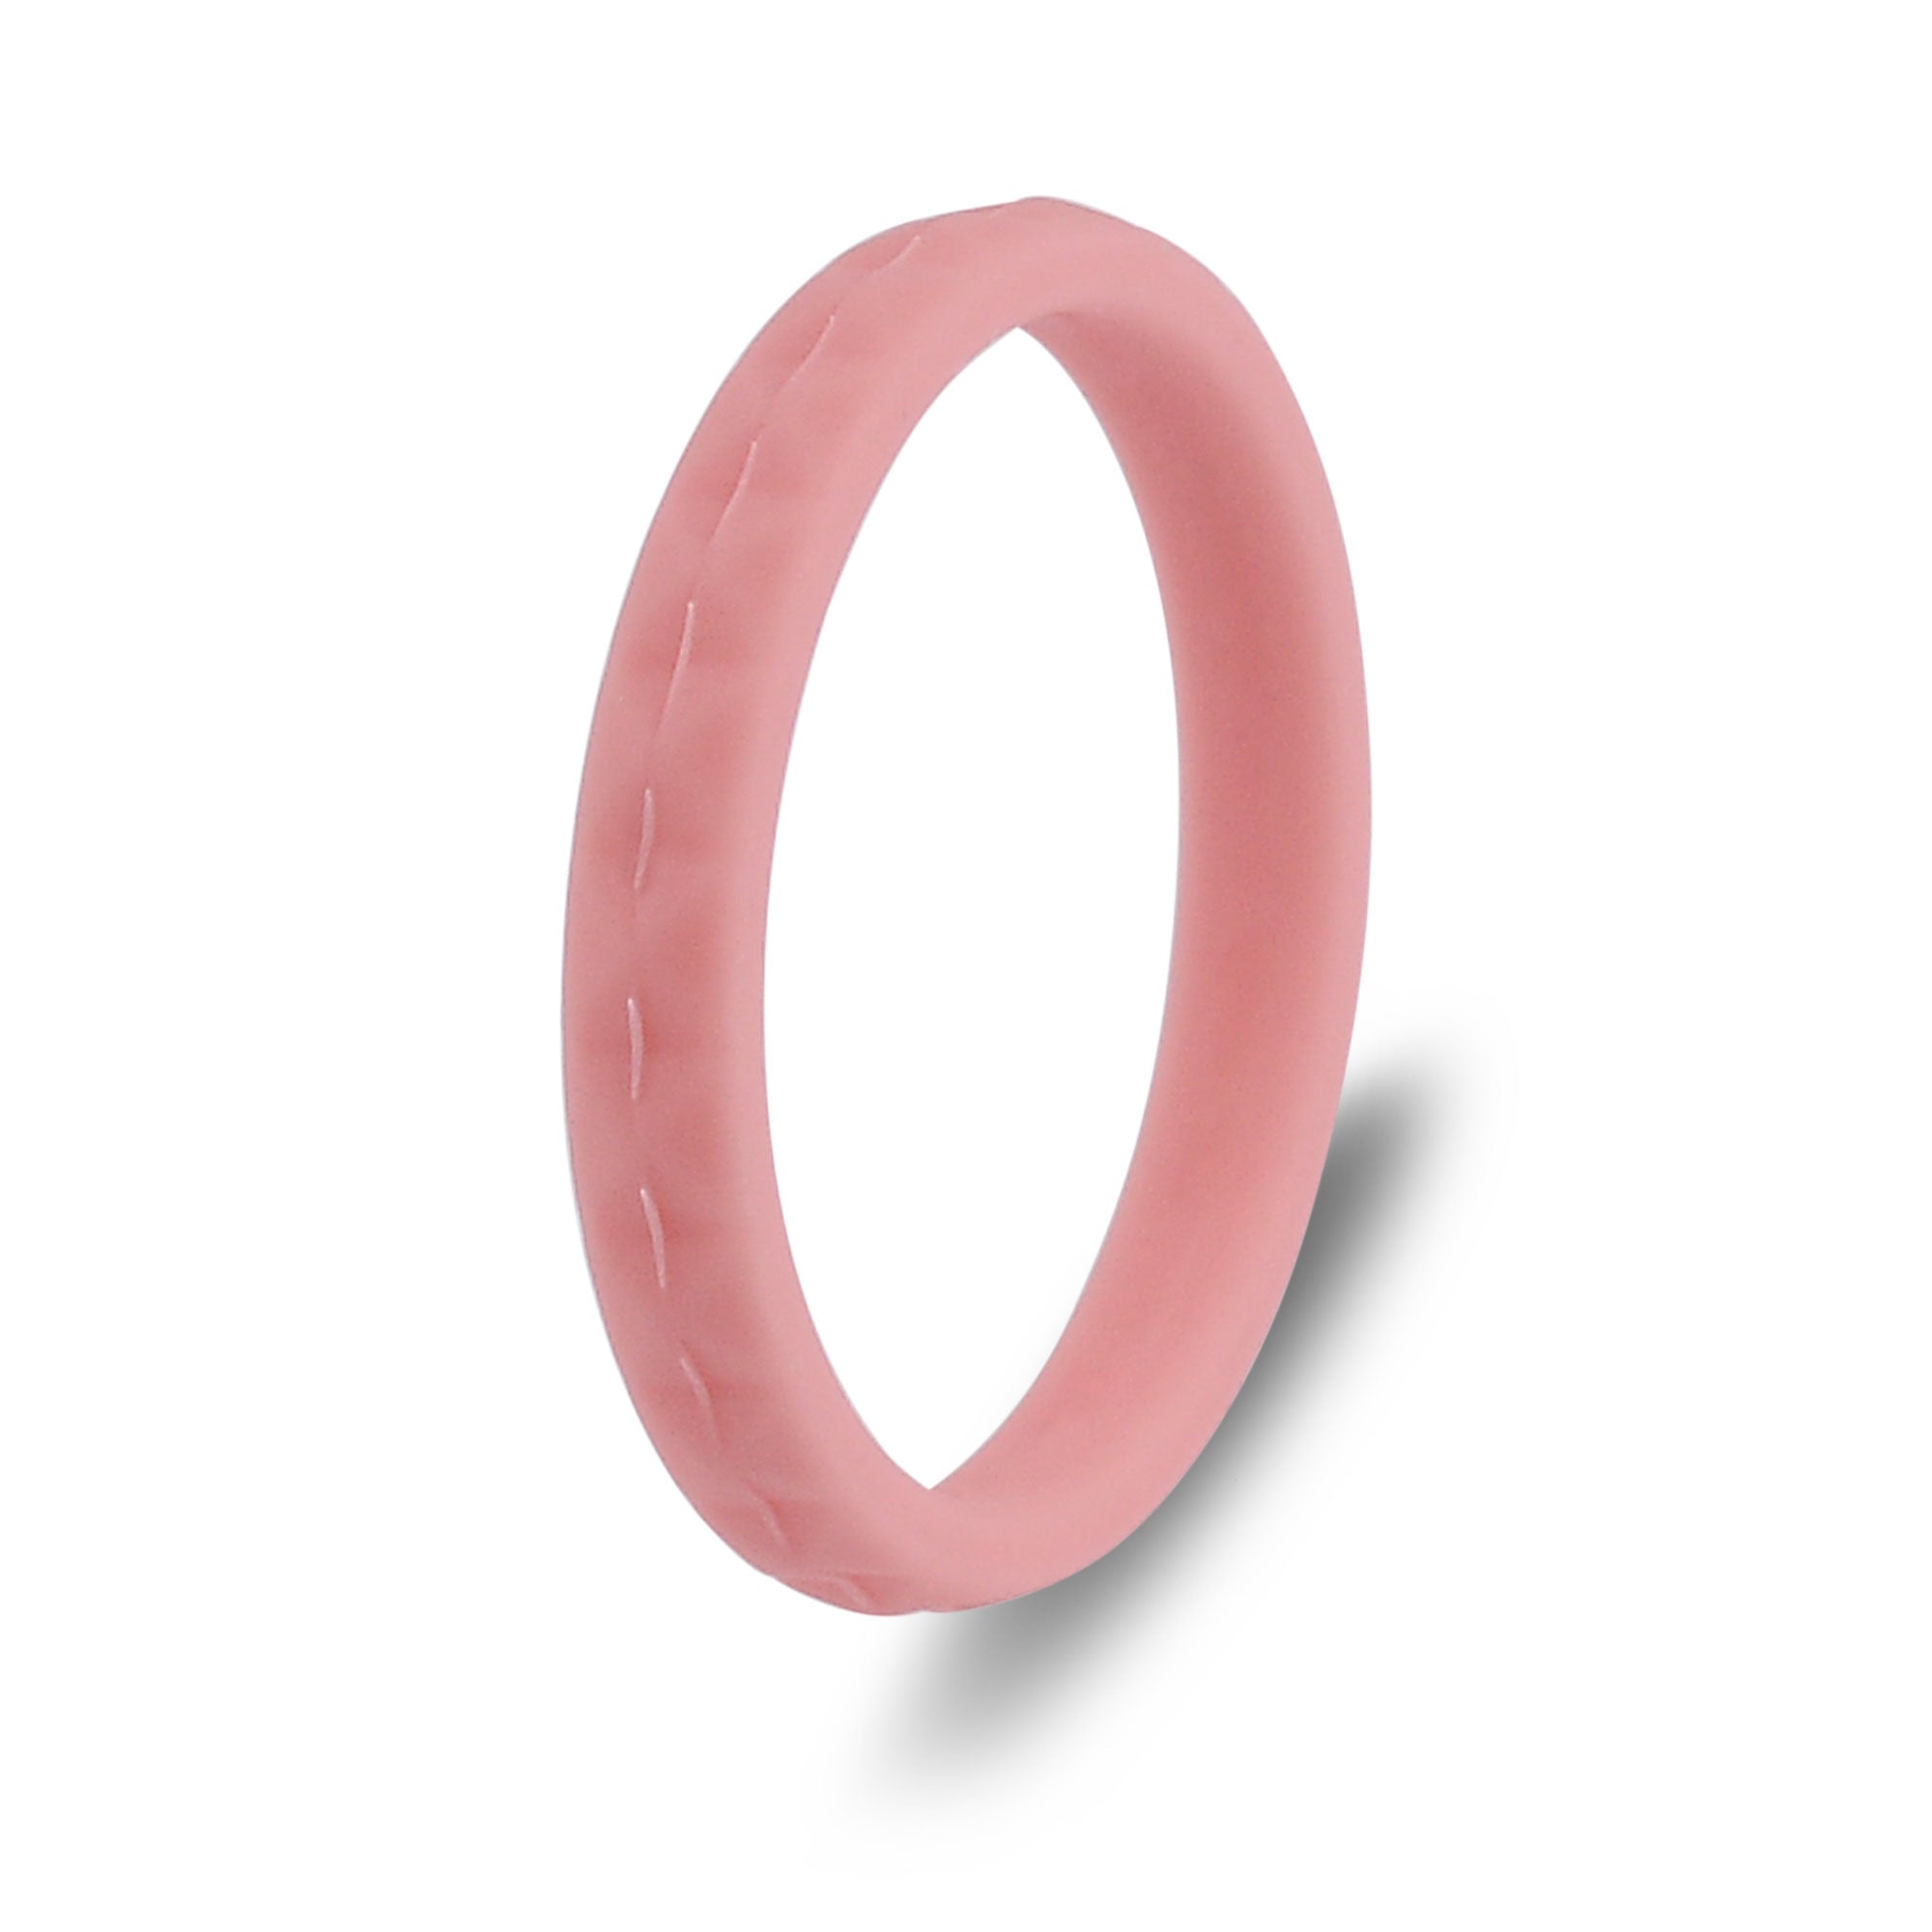 The Marshmallow Kiss - Silicone Ring